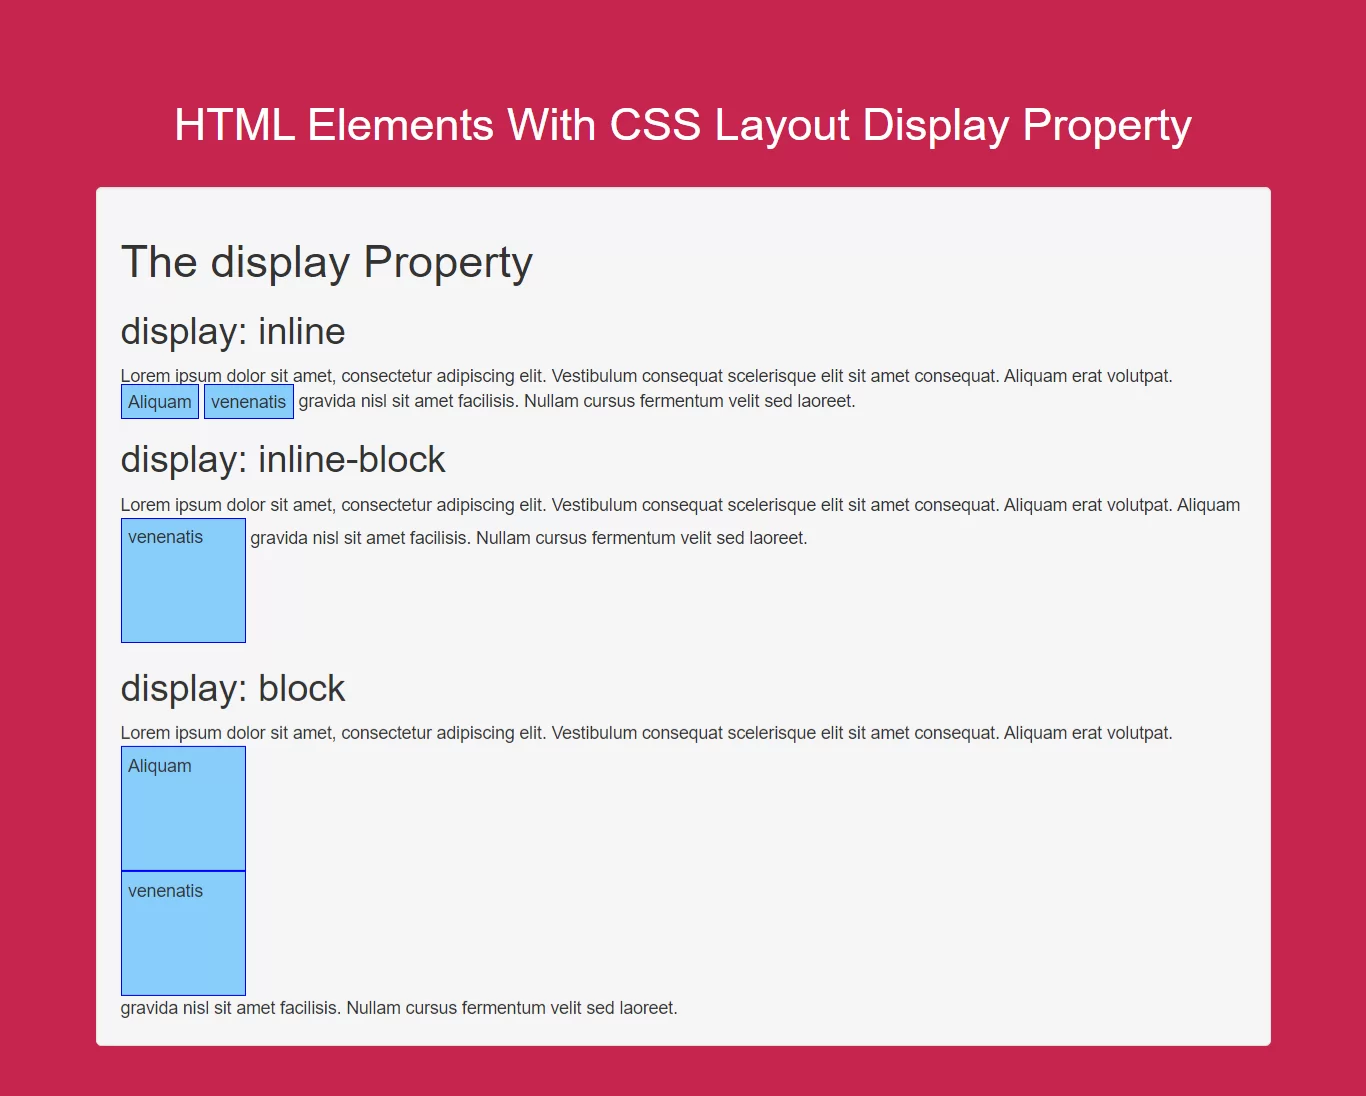 How To Set HTML Elements With CSS Layout Display Property